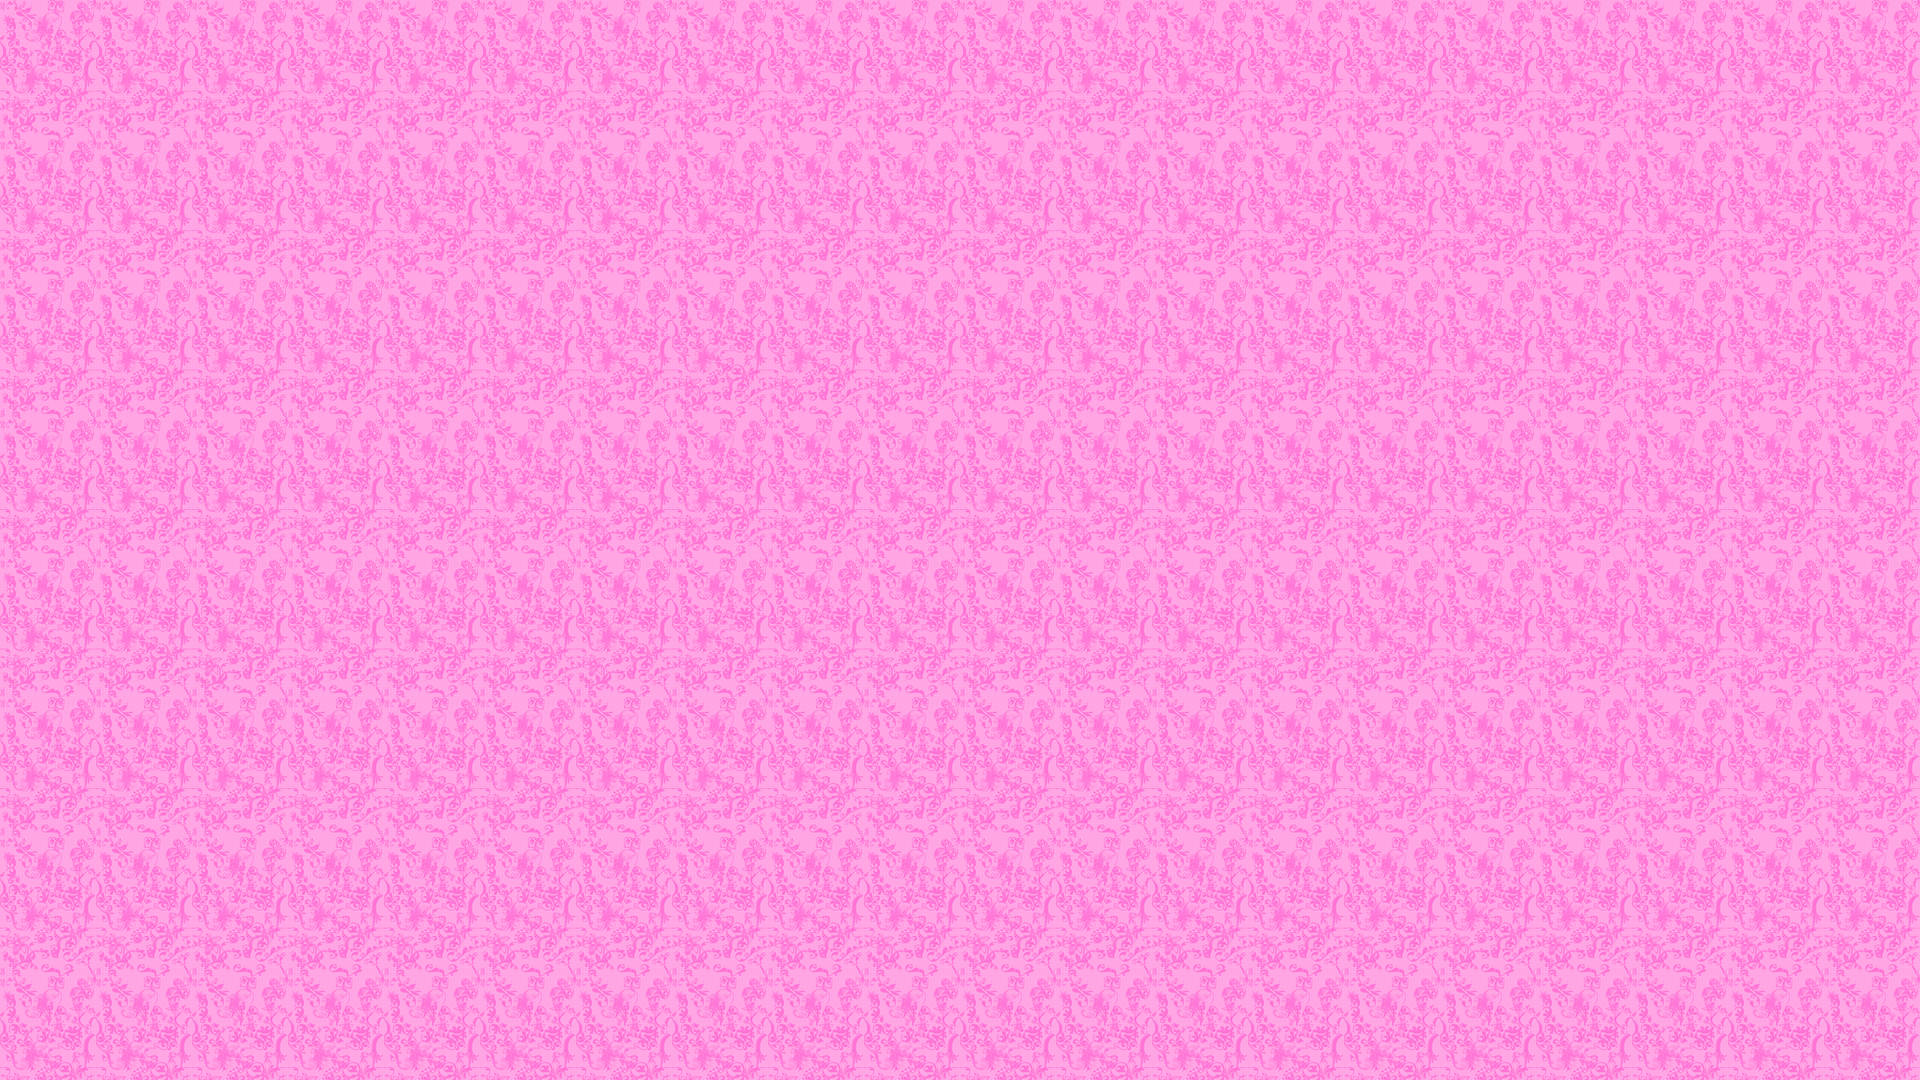 Hot Pink With Light Colored Patterns